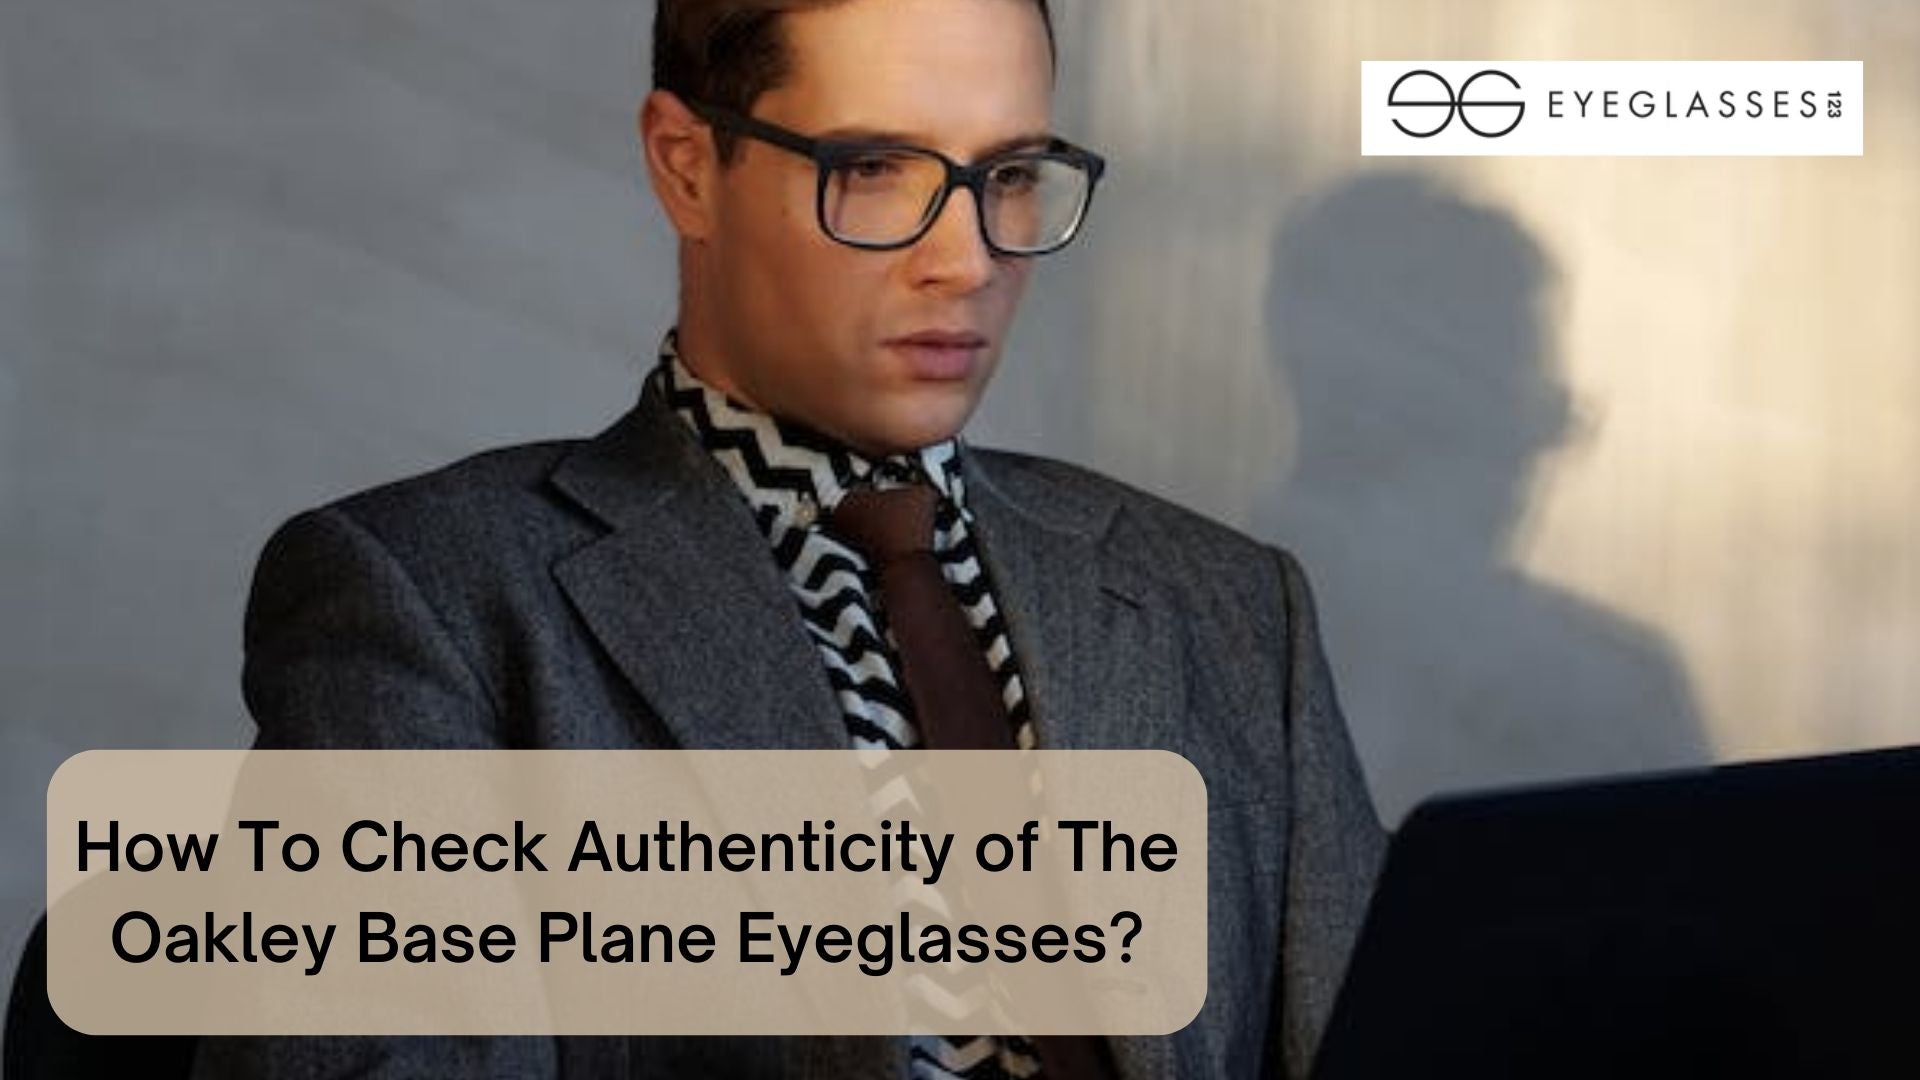 How To Check Authenticity of The Oakley Base Plane Eyeglasses?